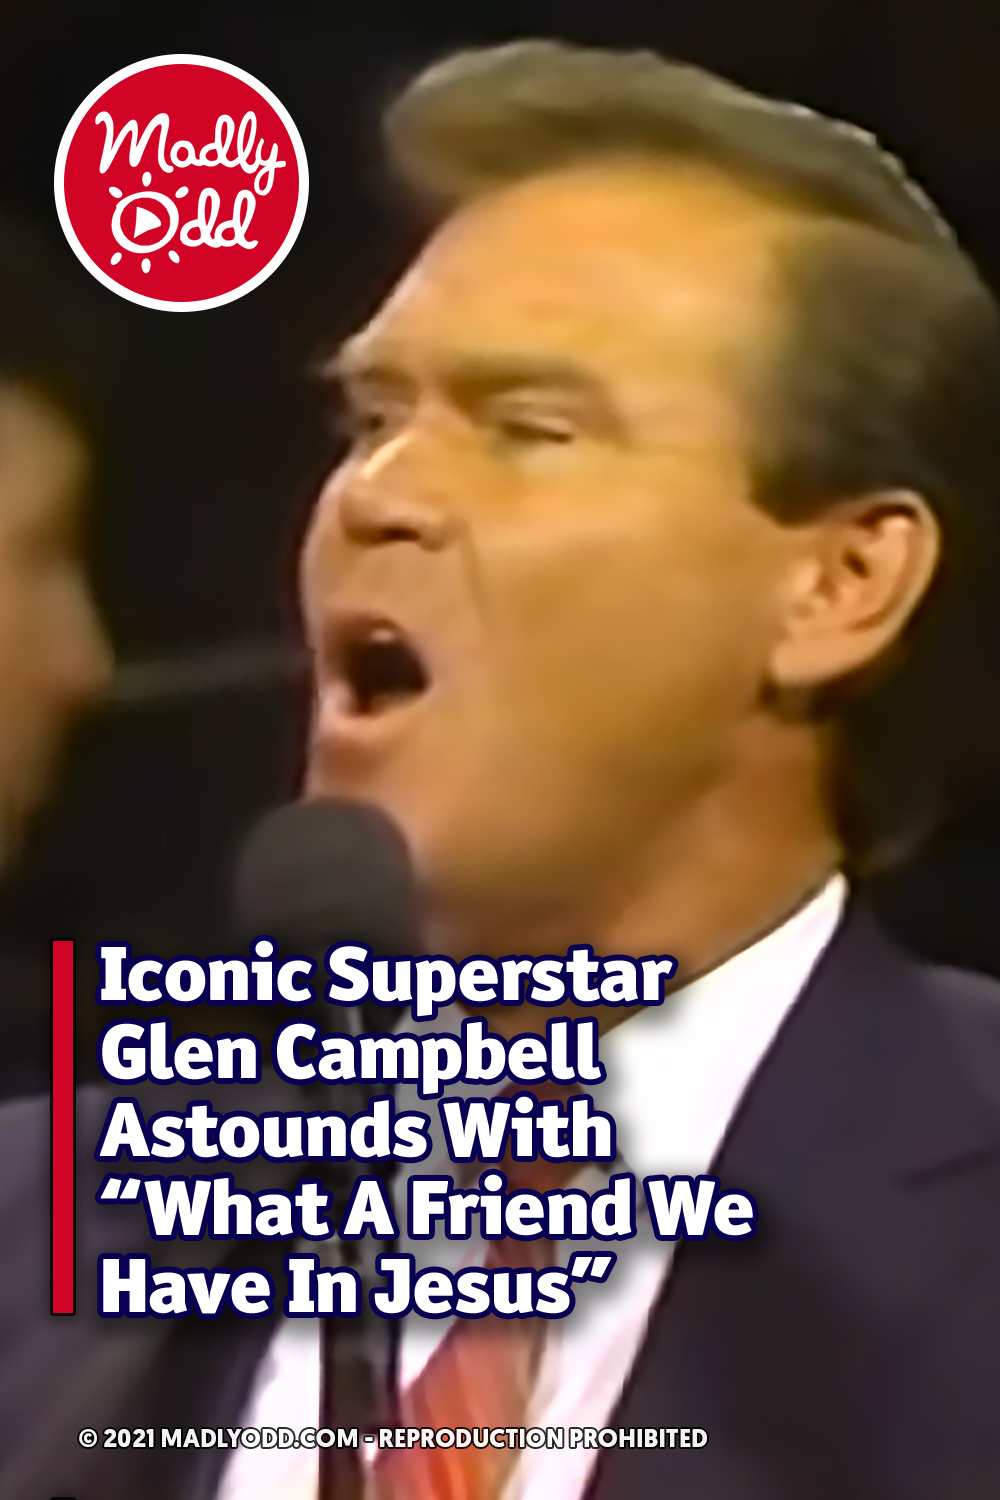 Iconic Superstar Glen Campbell Astounds With “What A Friend We Have In Jesus”